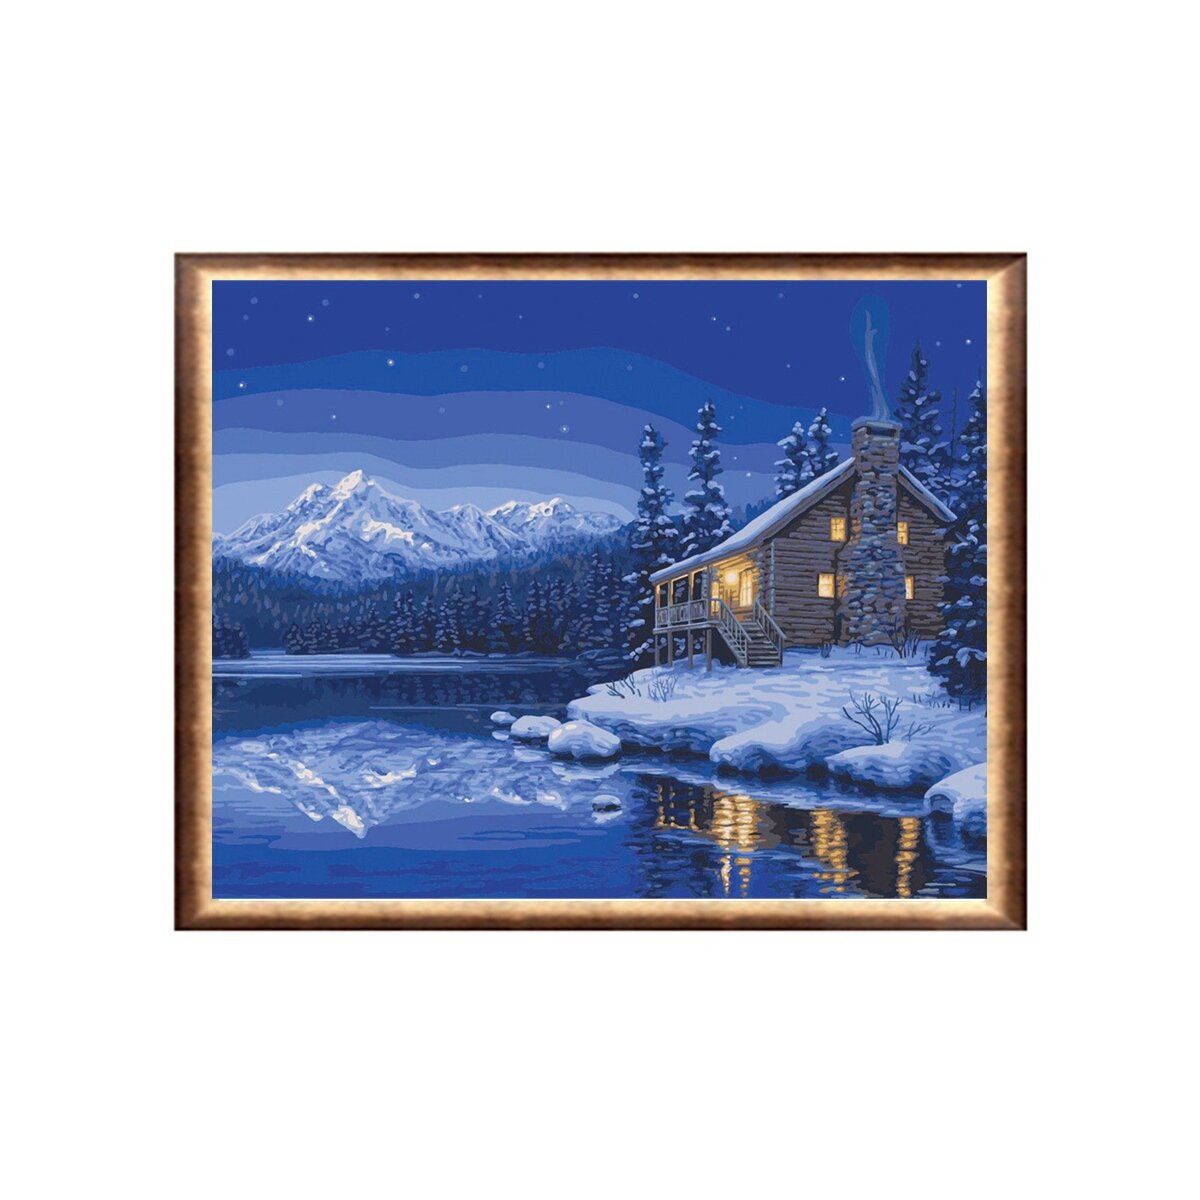 

DIY Painting by Numbers Canvas Lake House on a Snowy Night Hanging Picture Decor 50x40cm Home Living Supplies